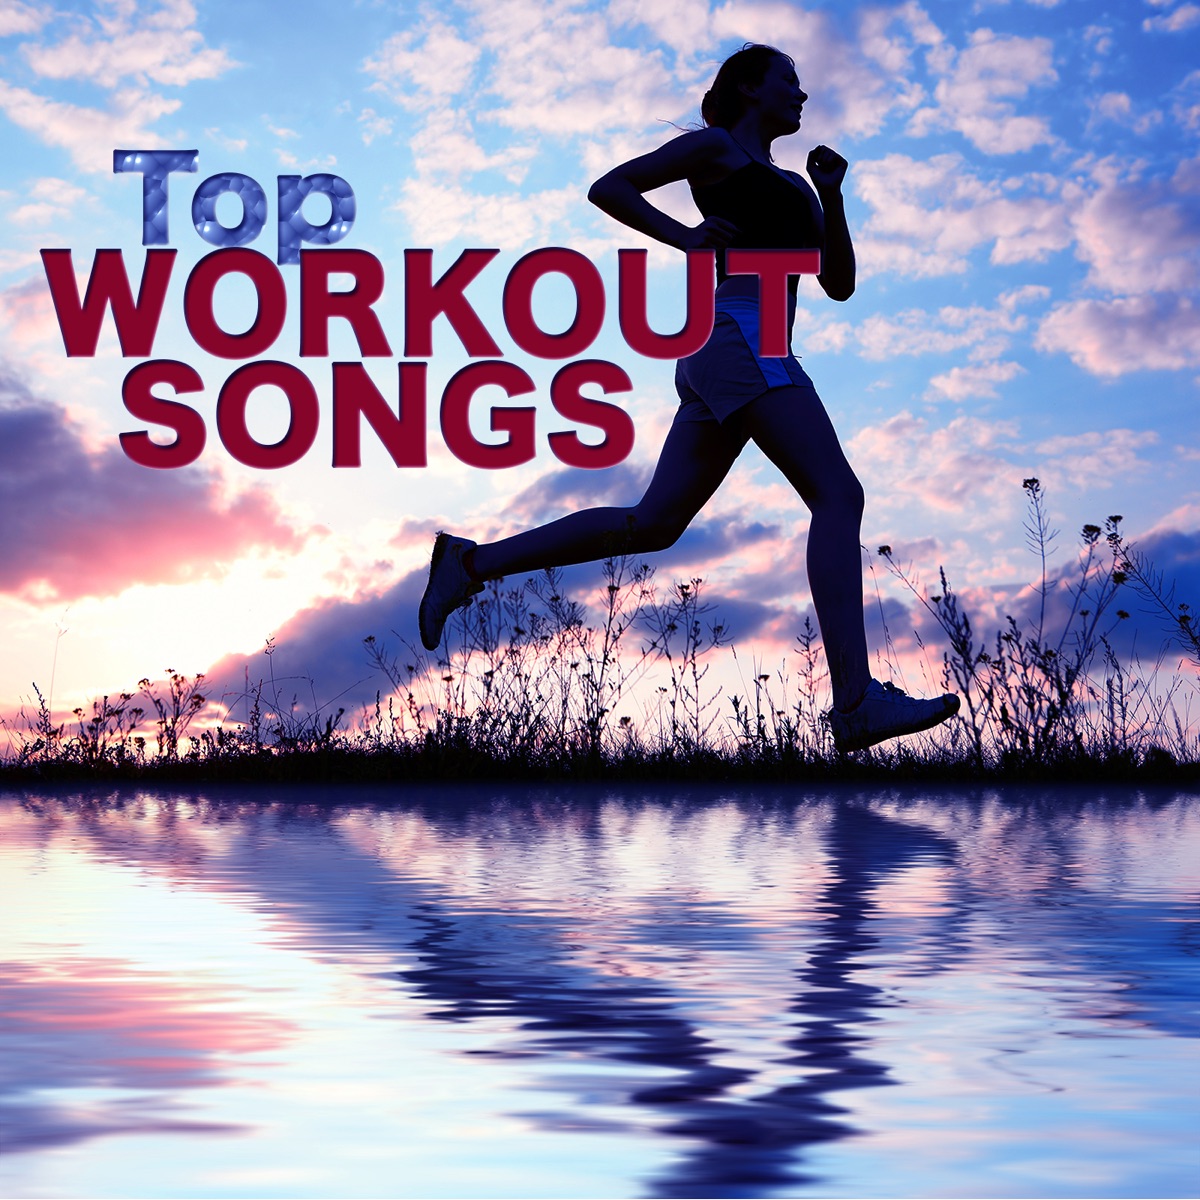 Top Workout Songs Gym Workout Power Walking Running Jogging And